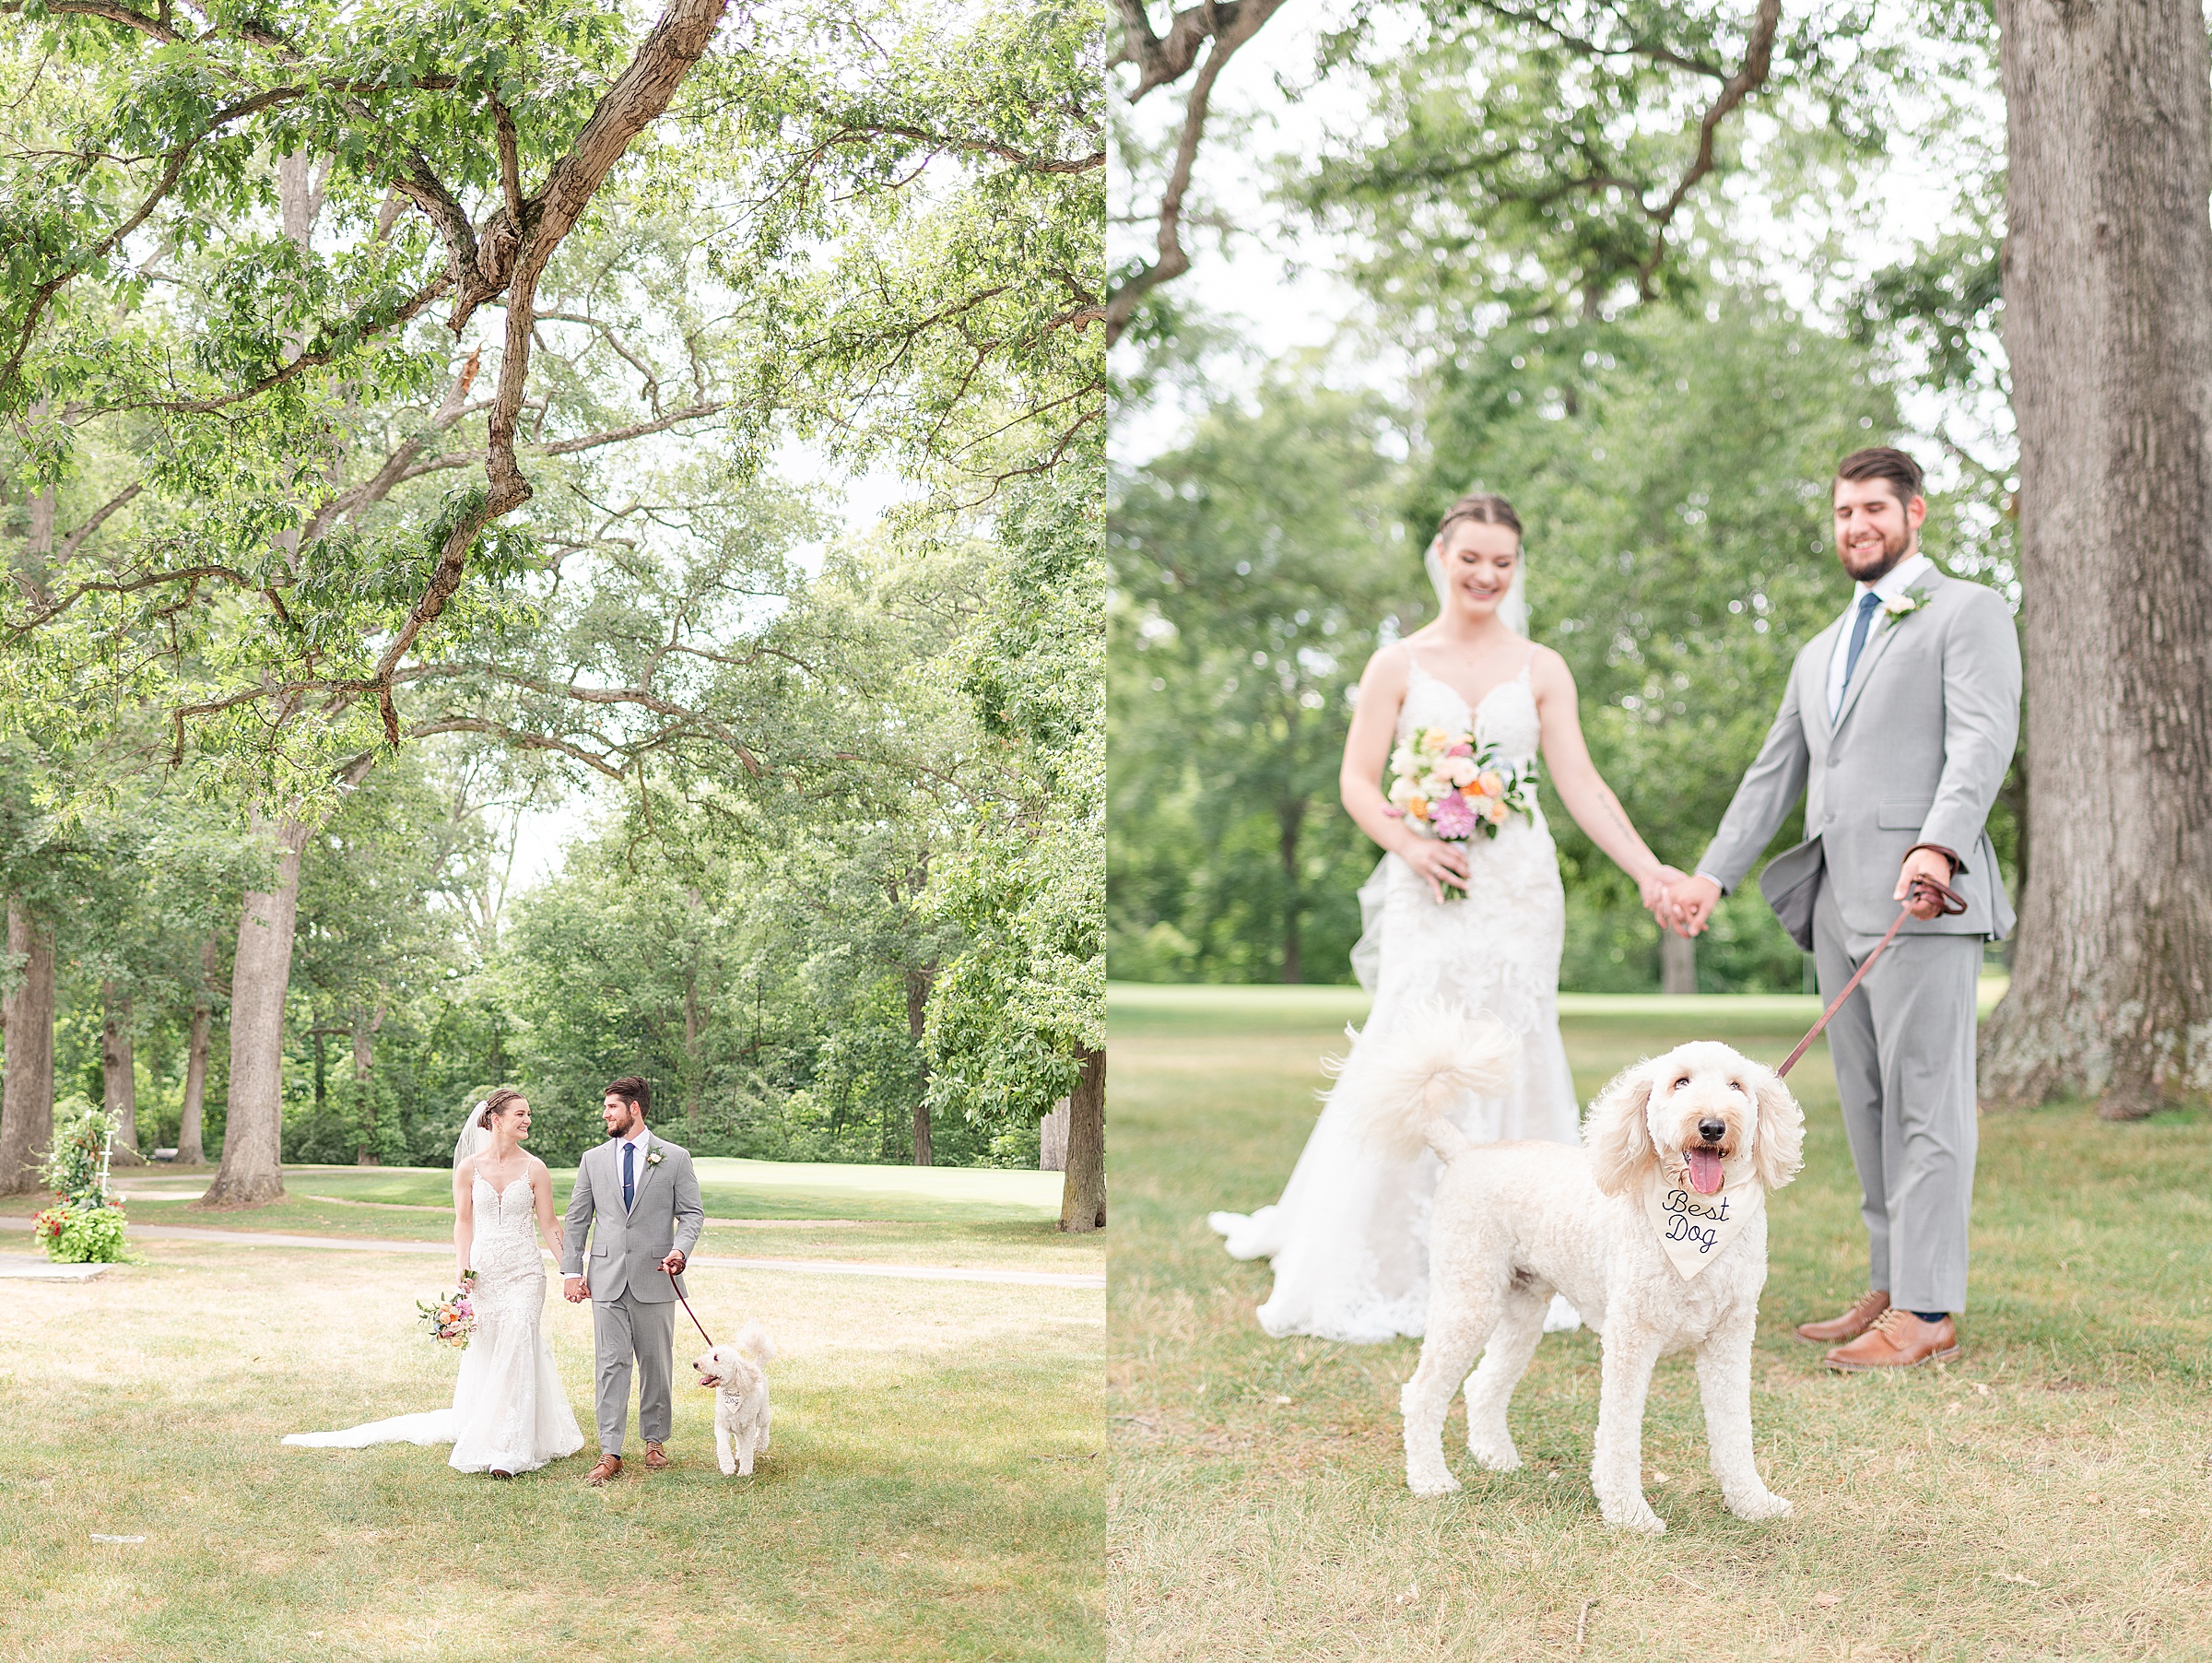 Bride and Groom with Dog | Anderson Country Club Wedding, Indiana